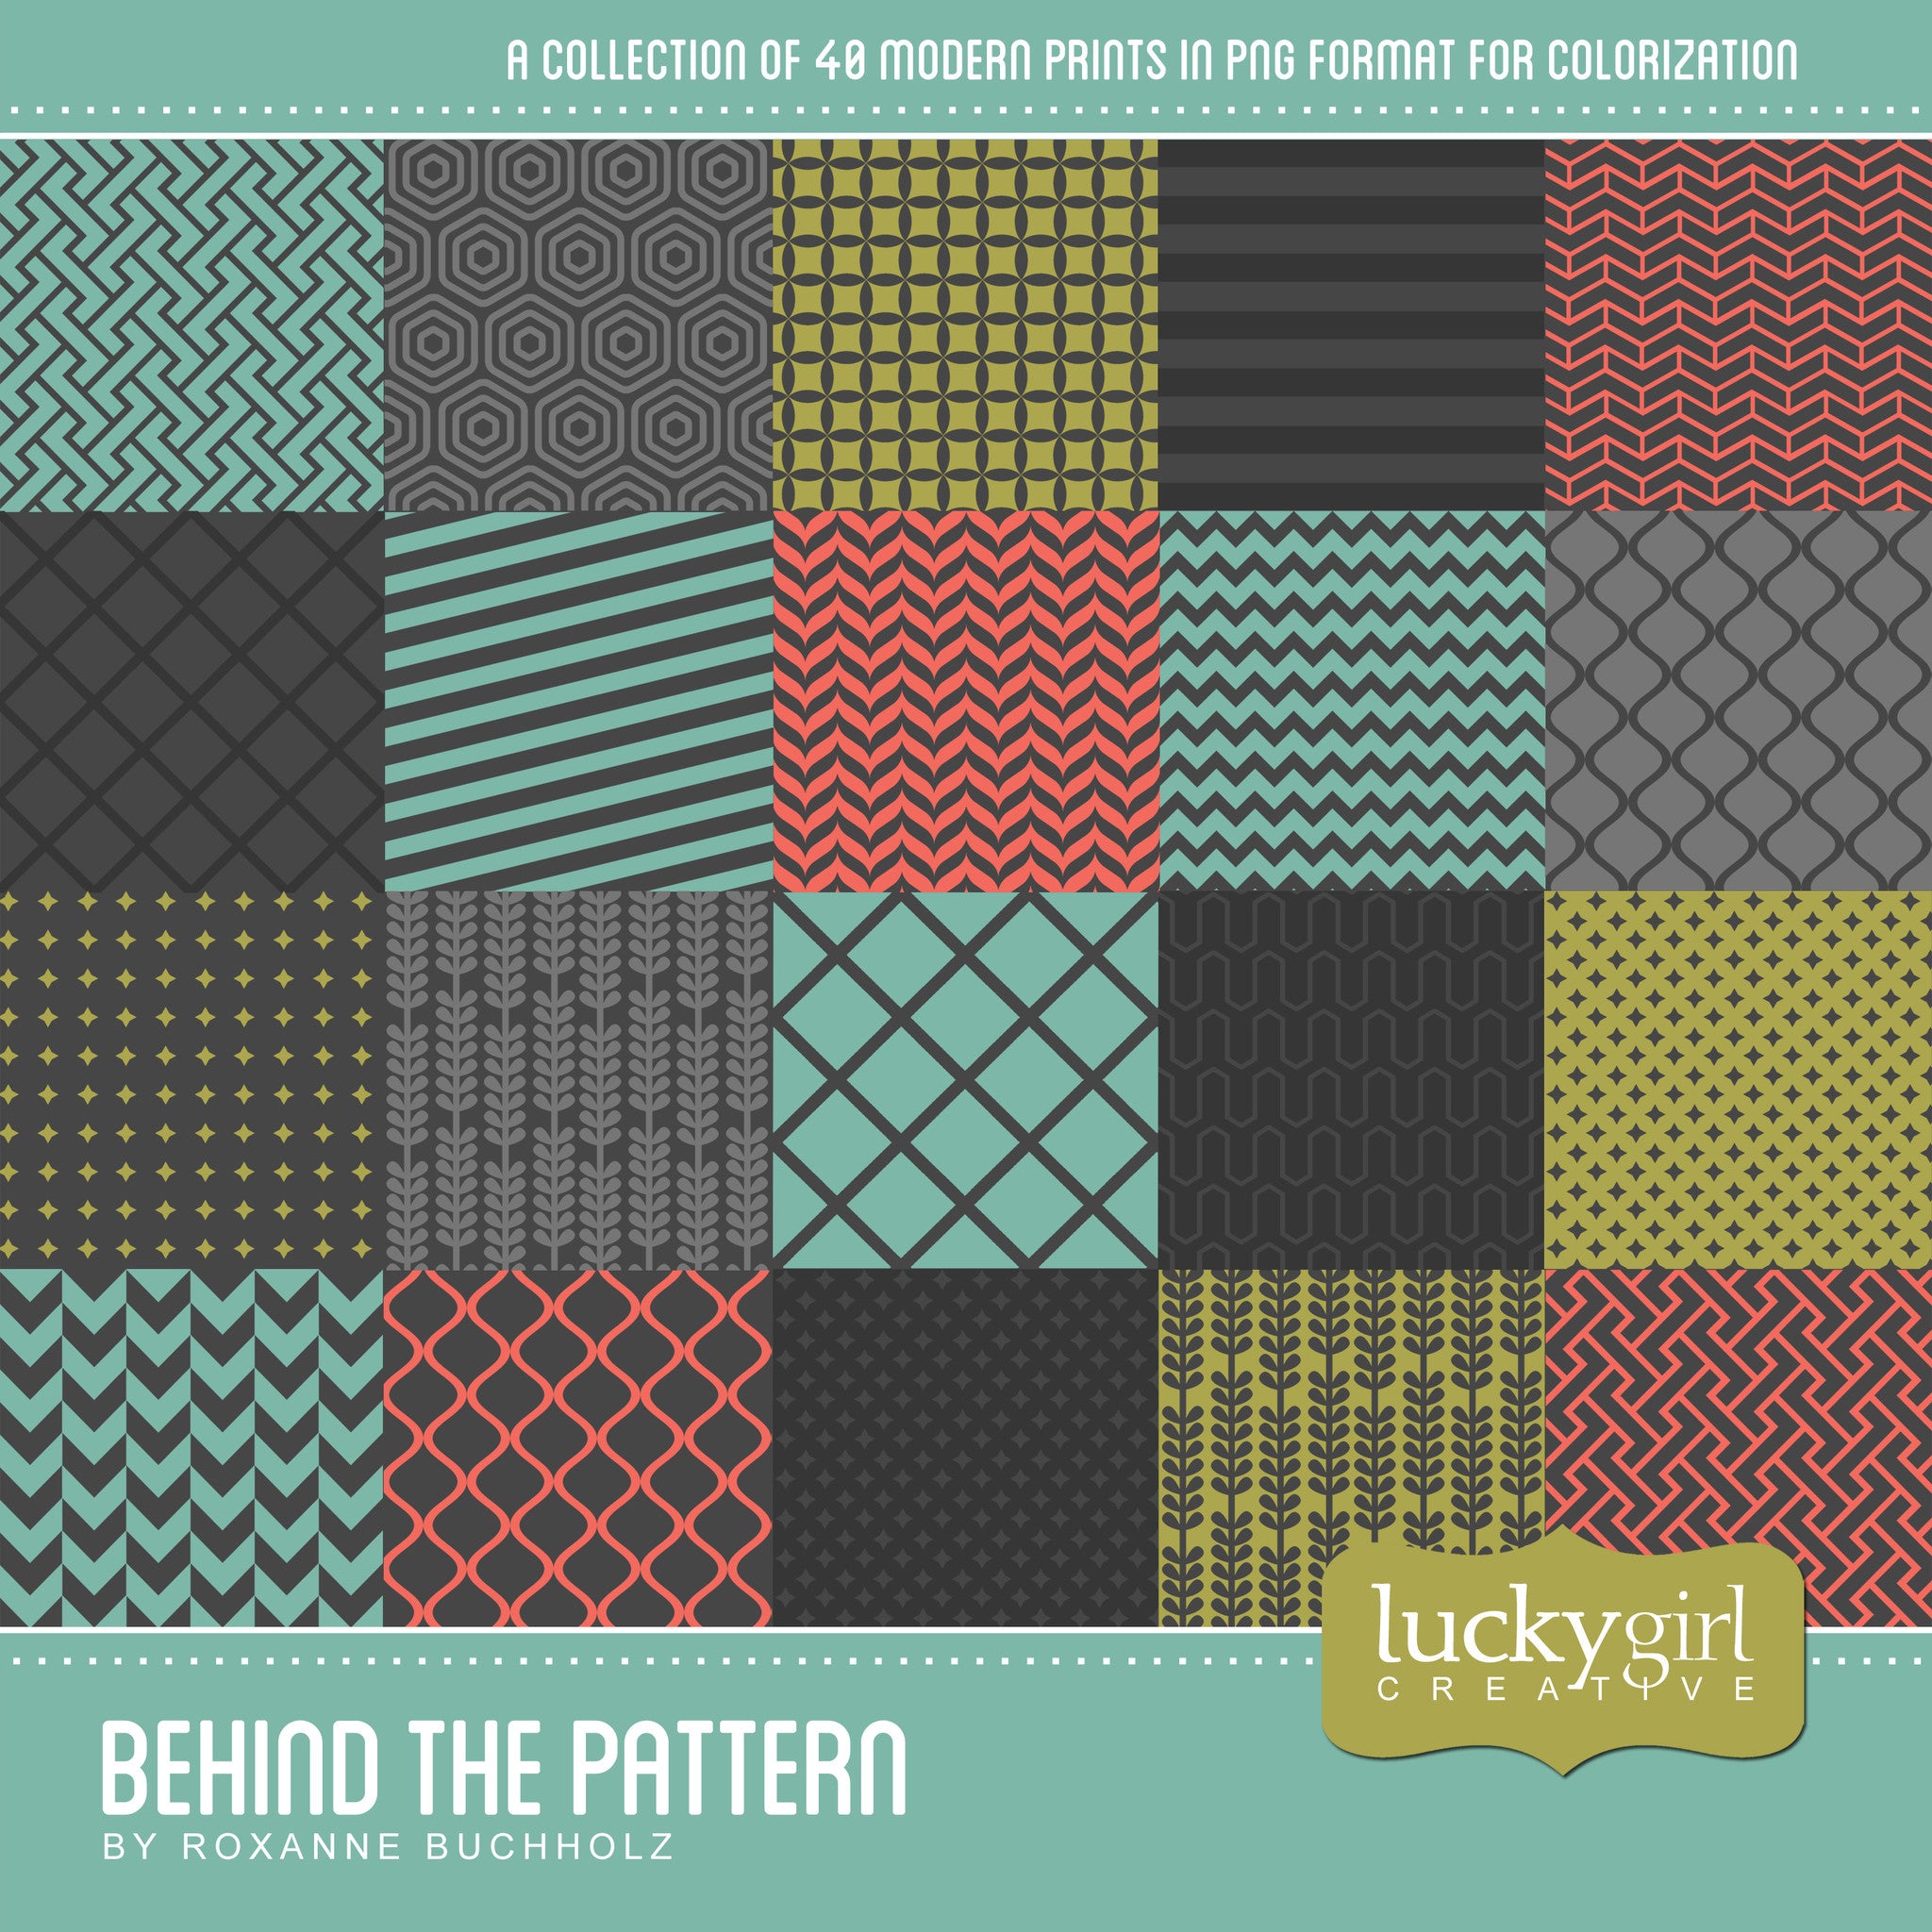 Behind the Pattern Digital Scrapbook Kit is created of all .png digital art files which allow you to create any pattern texture or paper that you’d like. All .png files are set for custom colorization and allow that extra special look to your scrapbook pages. Simply colorize the .png pattern and place over your favorite color or piece of digital scrapbook paper. The possibilities are endless with these modern and right-on-trend .png files.